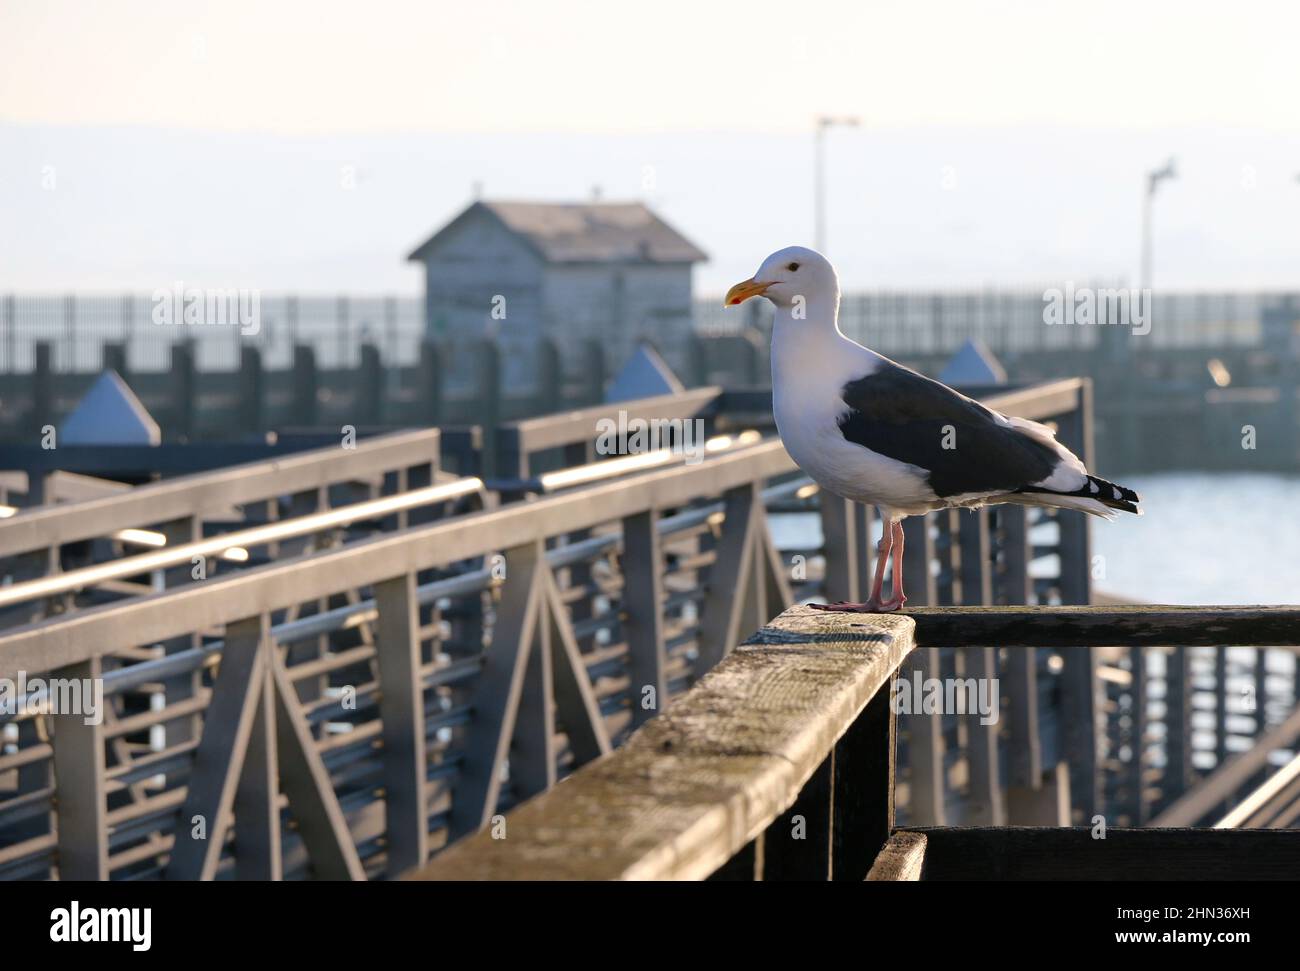 White sea gull perched on a railing, Monterey Bay Harbor. Stock Photo